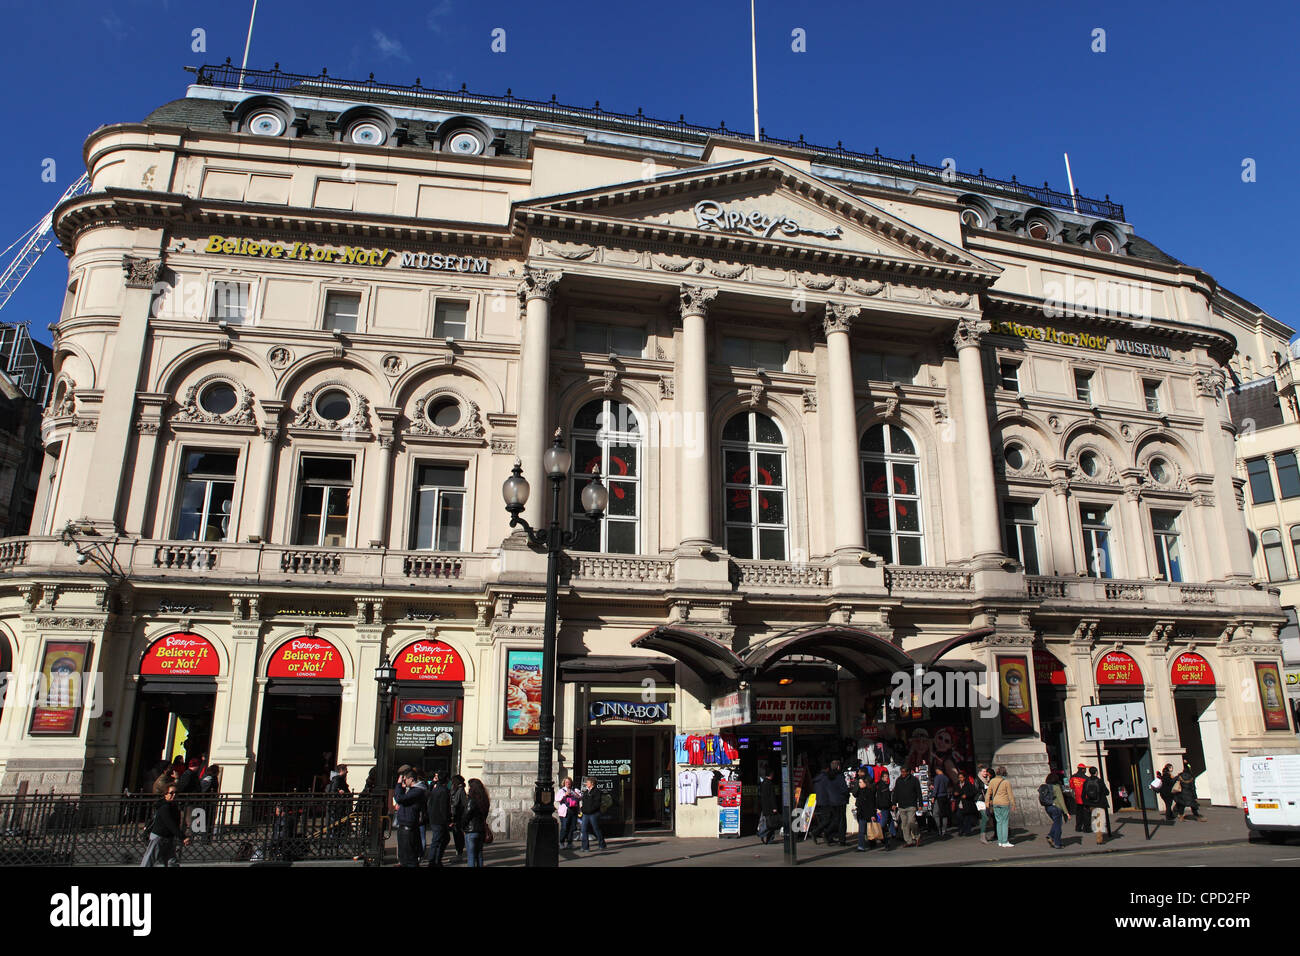 Classical facade of the Ripley's Believe It or Not! Museum, Piccadilly Circus, London, England, United Kingdom, Europe Stock Photo